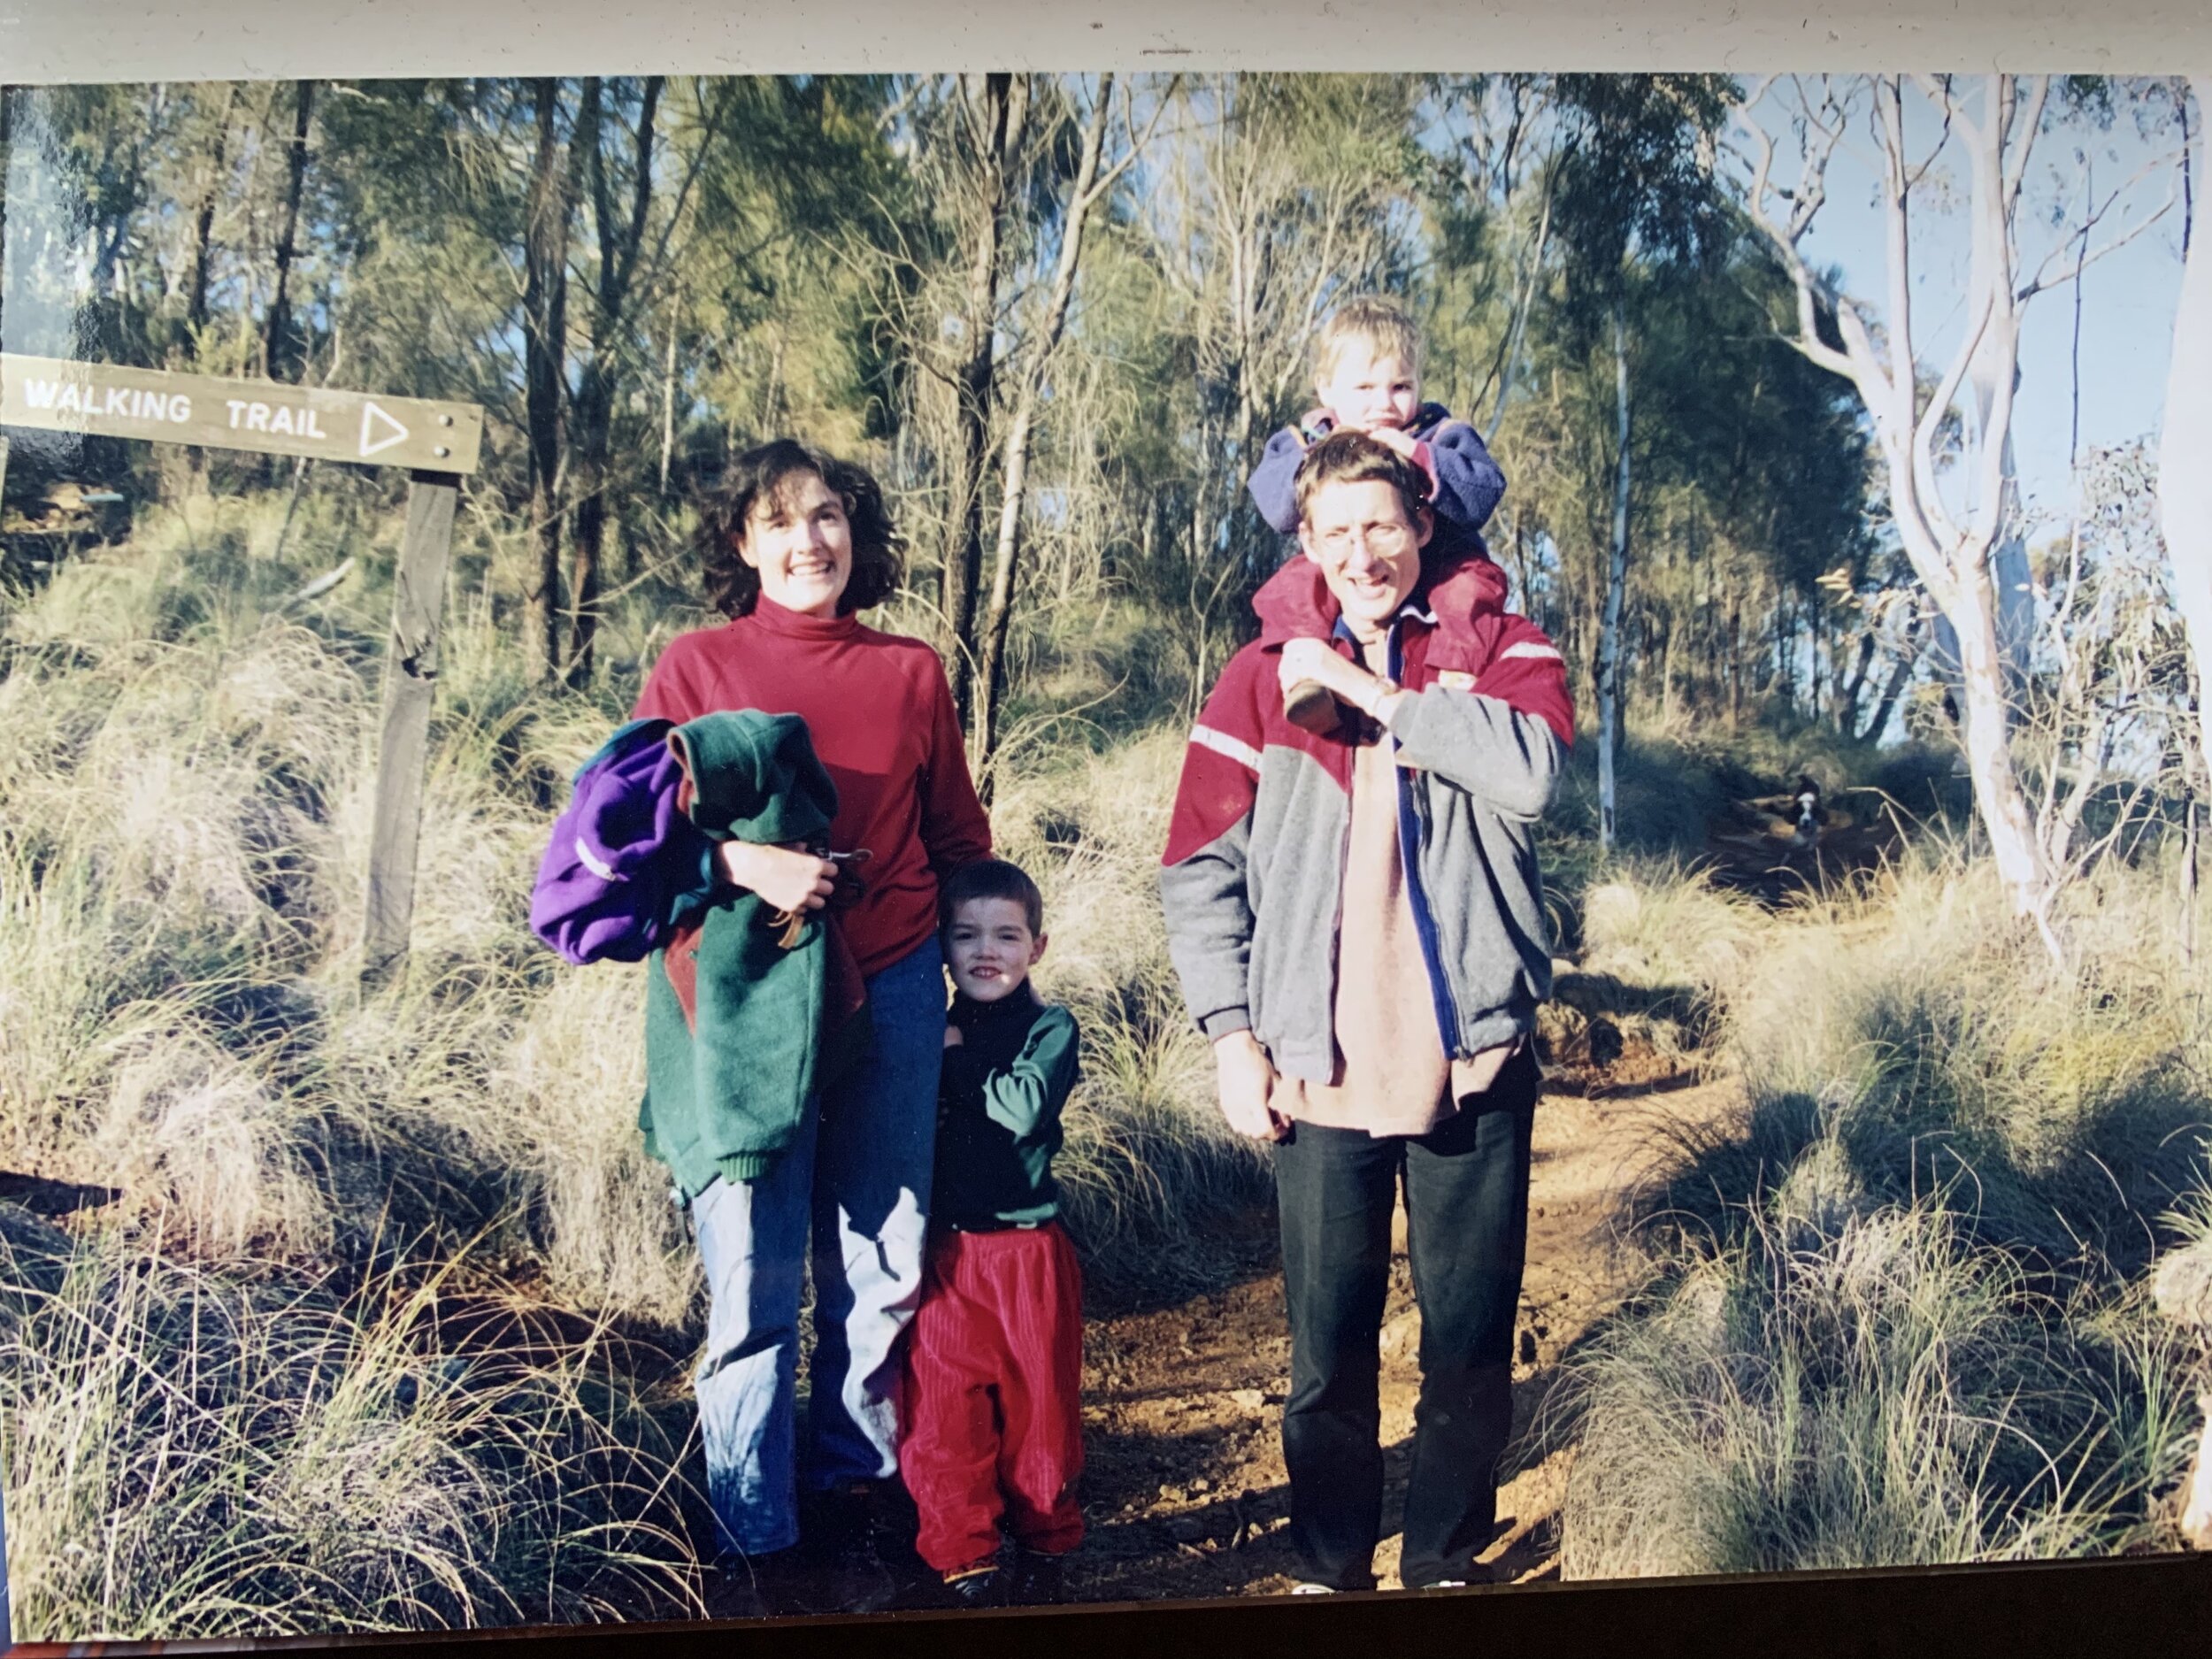  Bushwalking was always a big part of Lachlan’s childhood. Here he is pictured as a child with his parents and family friend. 